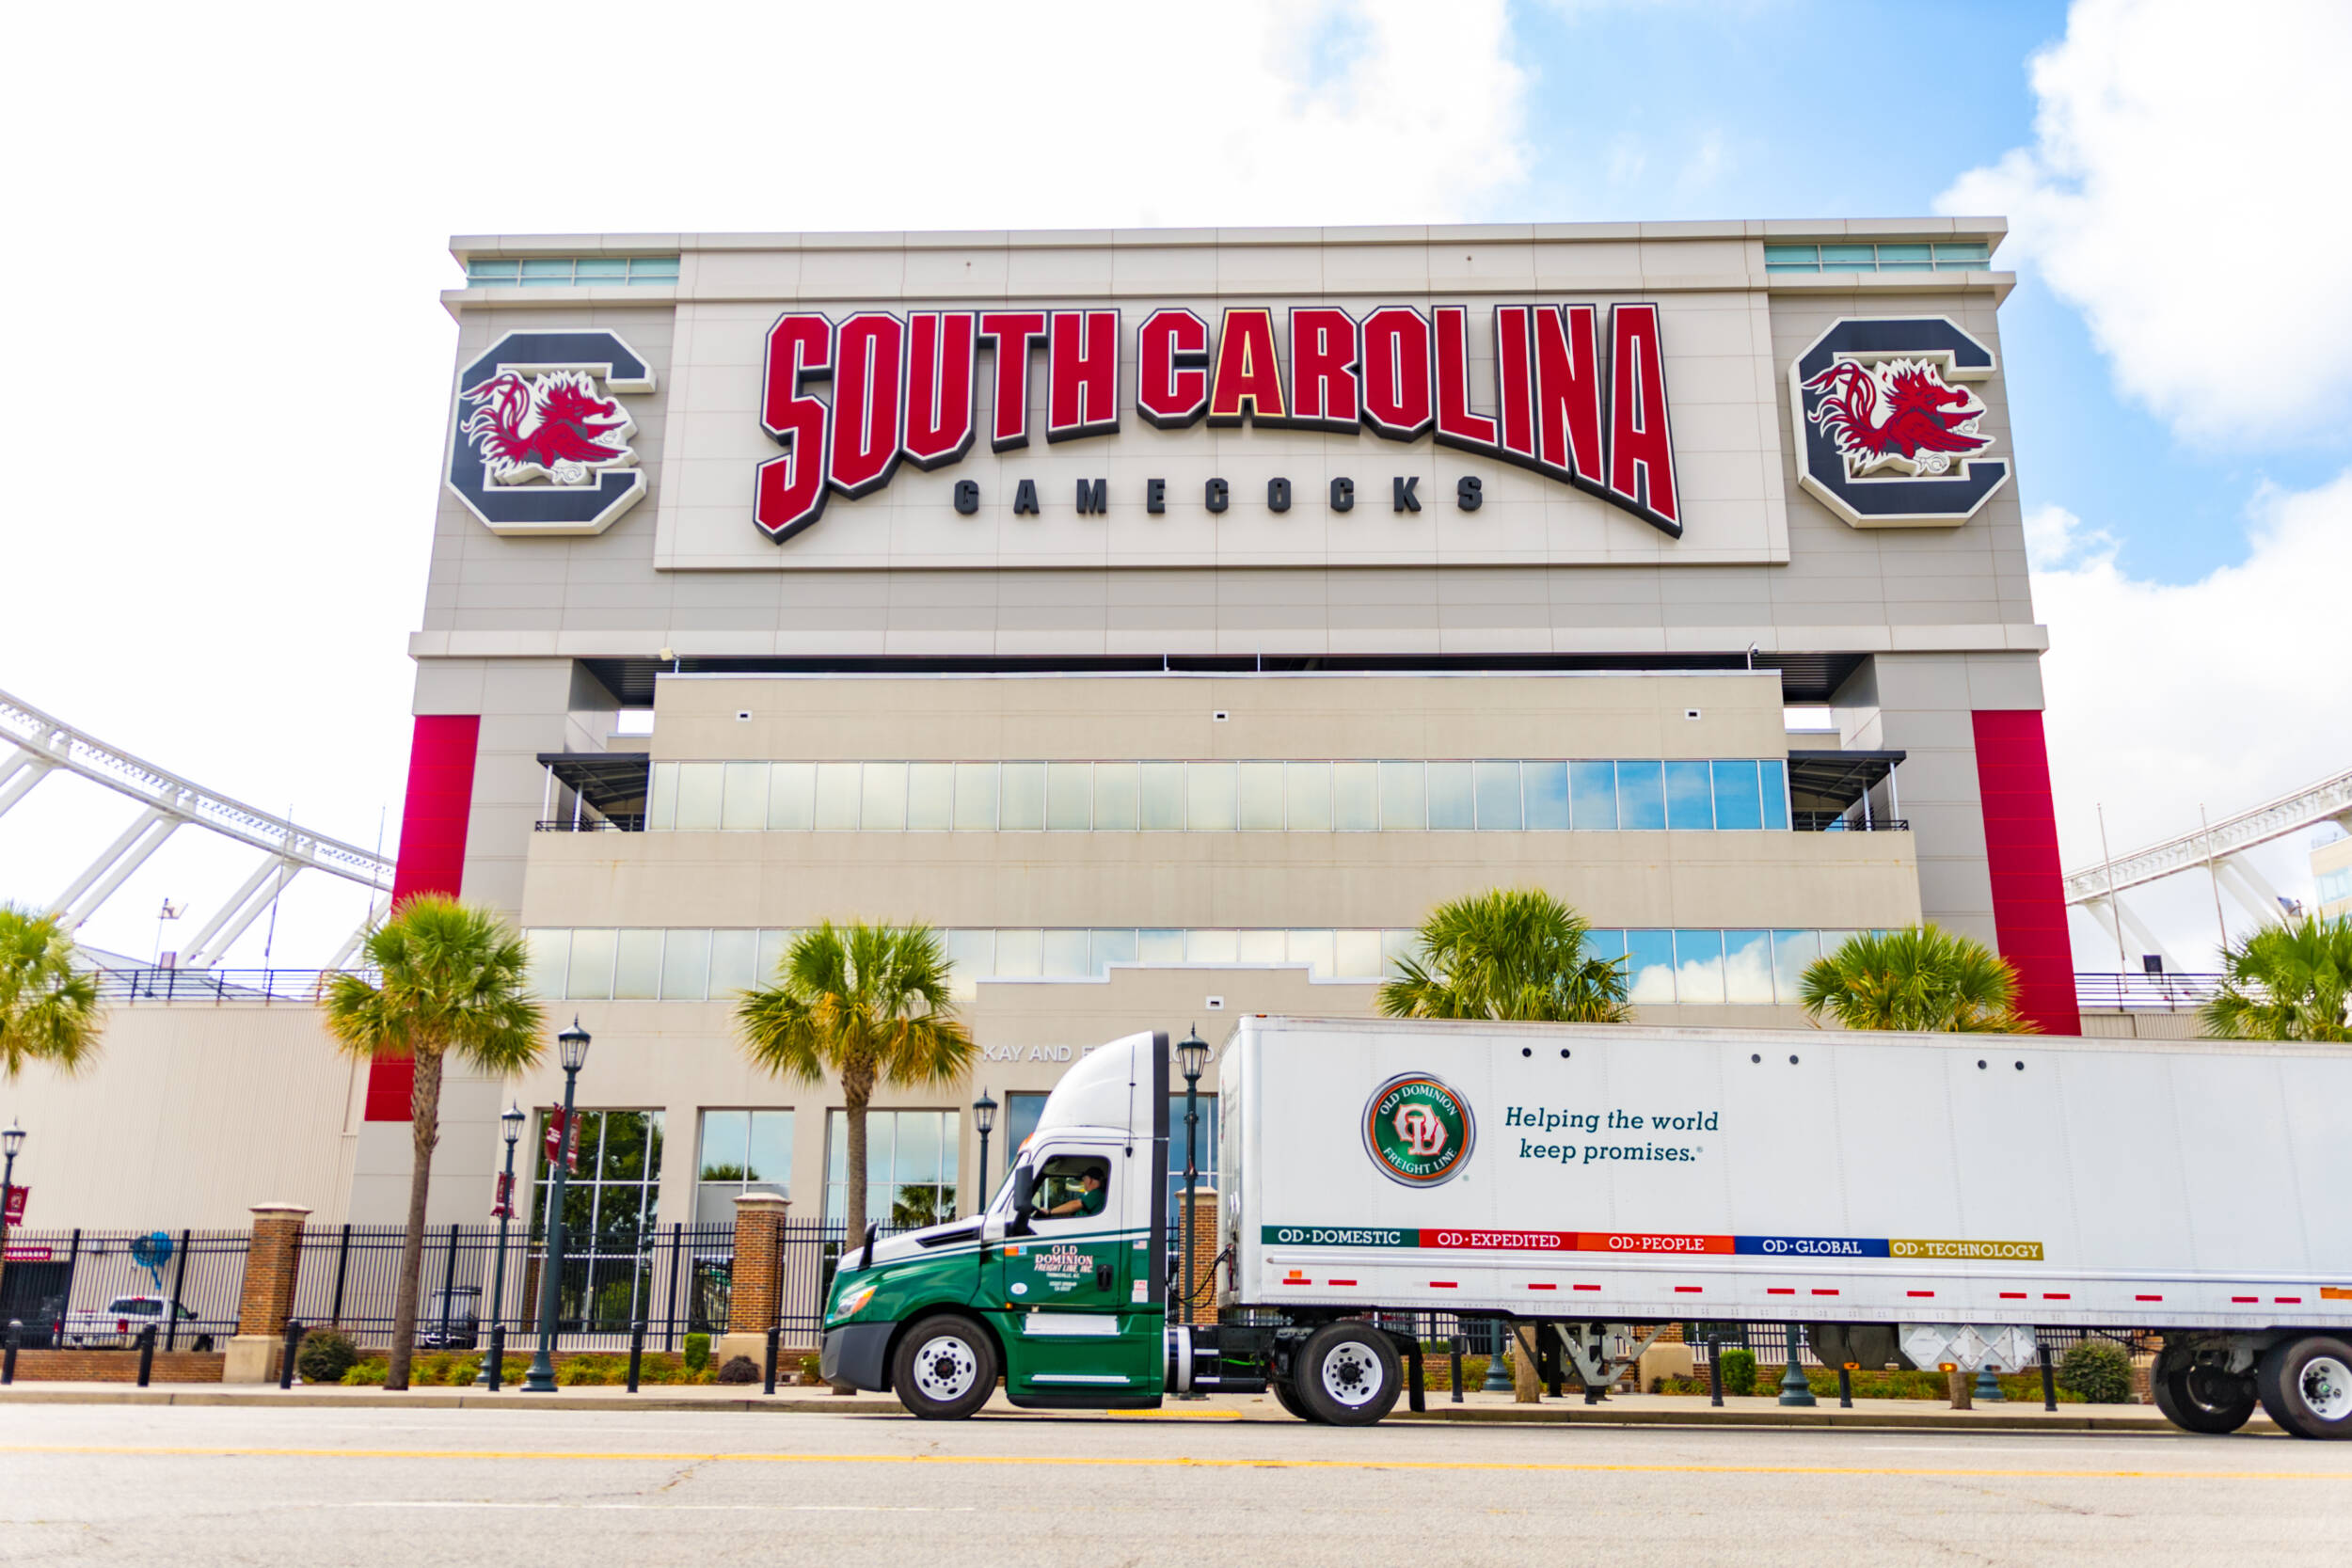 Old Dominion Freight Line Aligns with University of South Carolina as the Official Freight Carrier of South Carolina Athletics